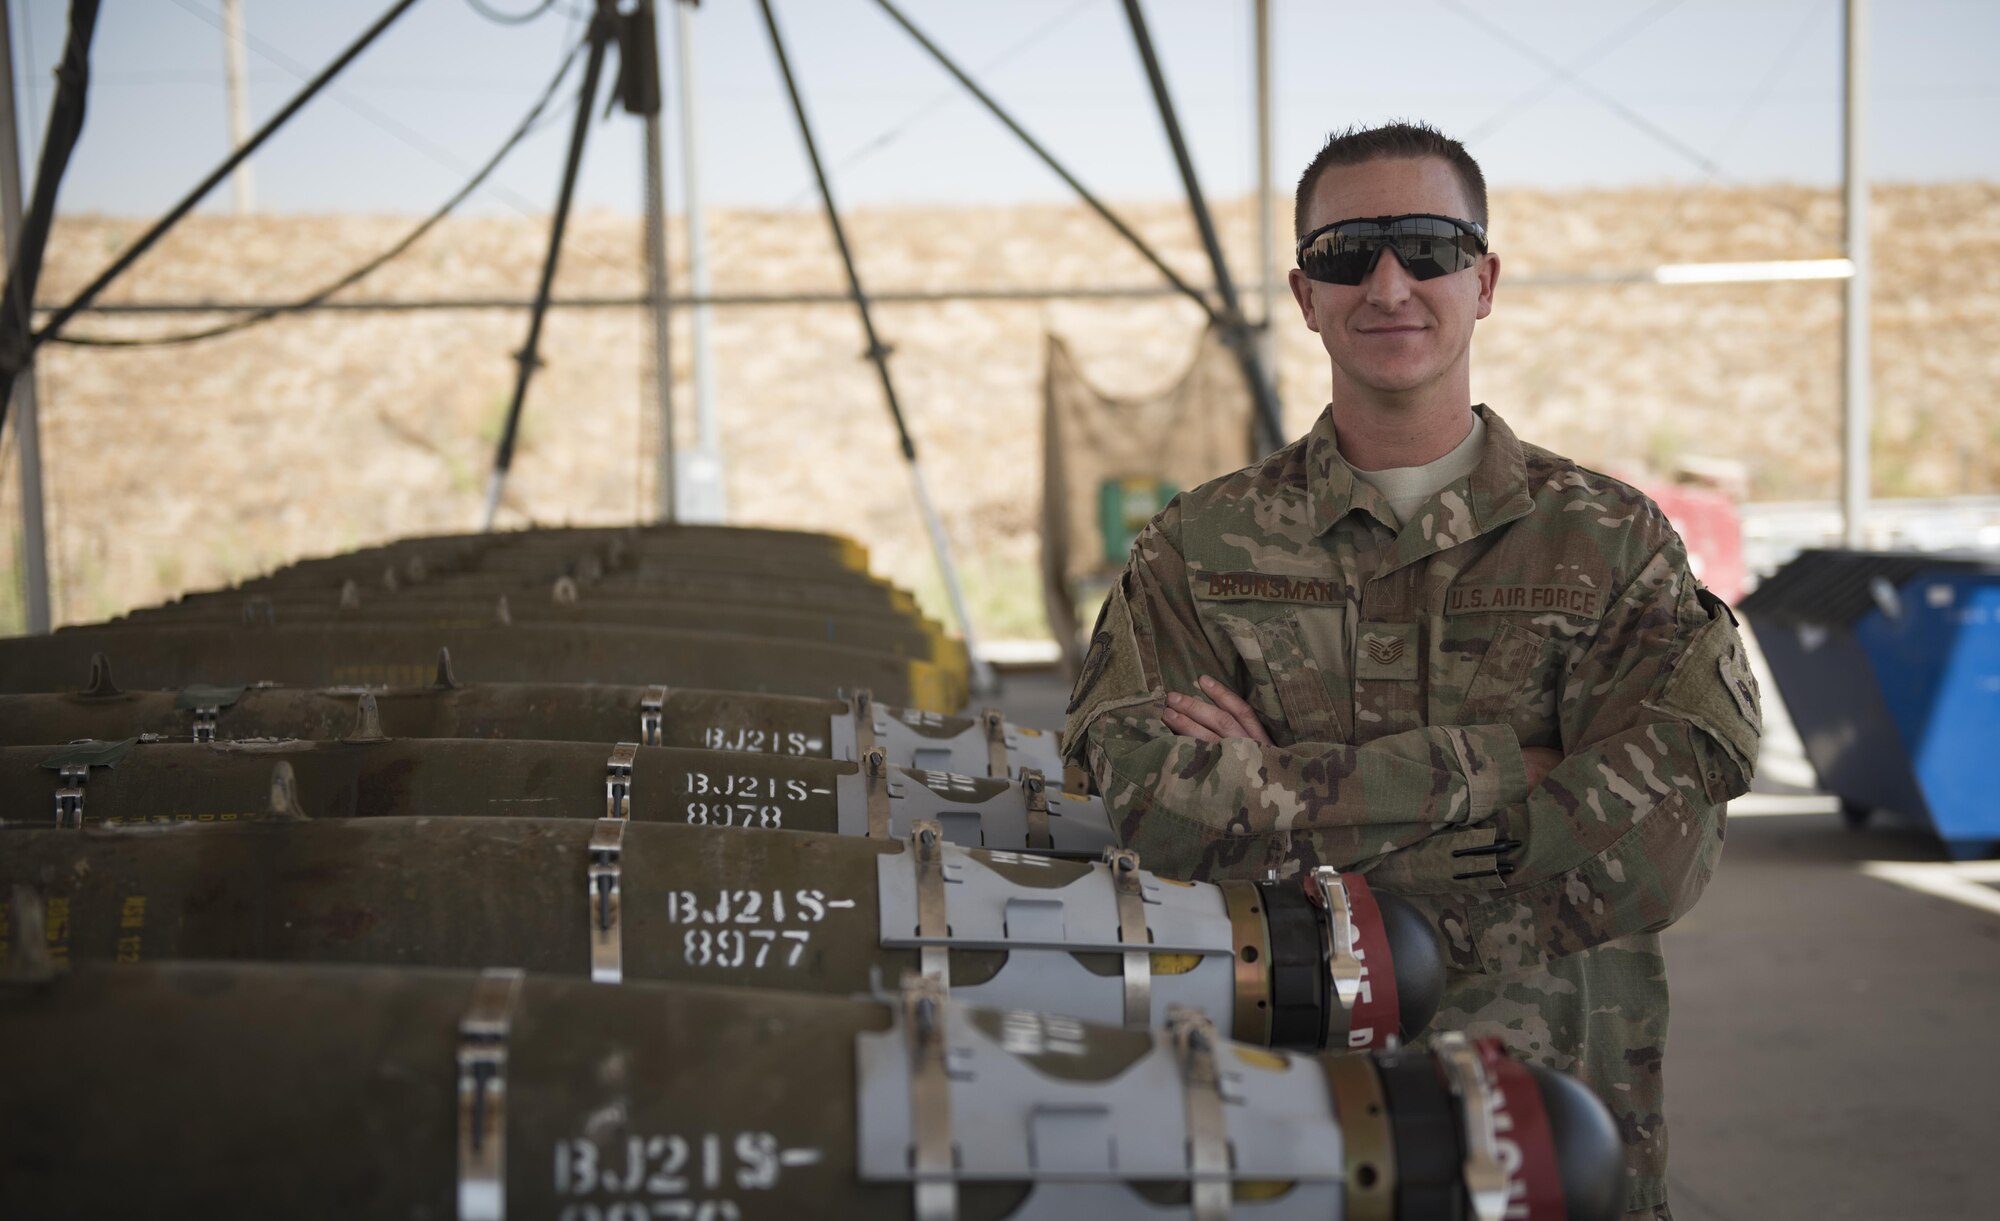 Tech. Sgt. Chris Brunsman is a munitions systems specialist assigned to the 455th Expeditionary Maintenance Squadron, Bagram Airfield, Afghanistan.